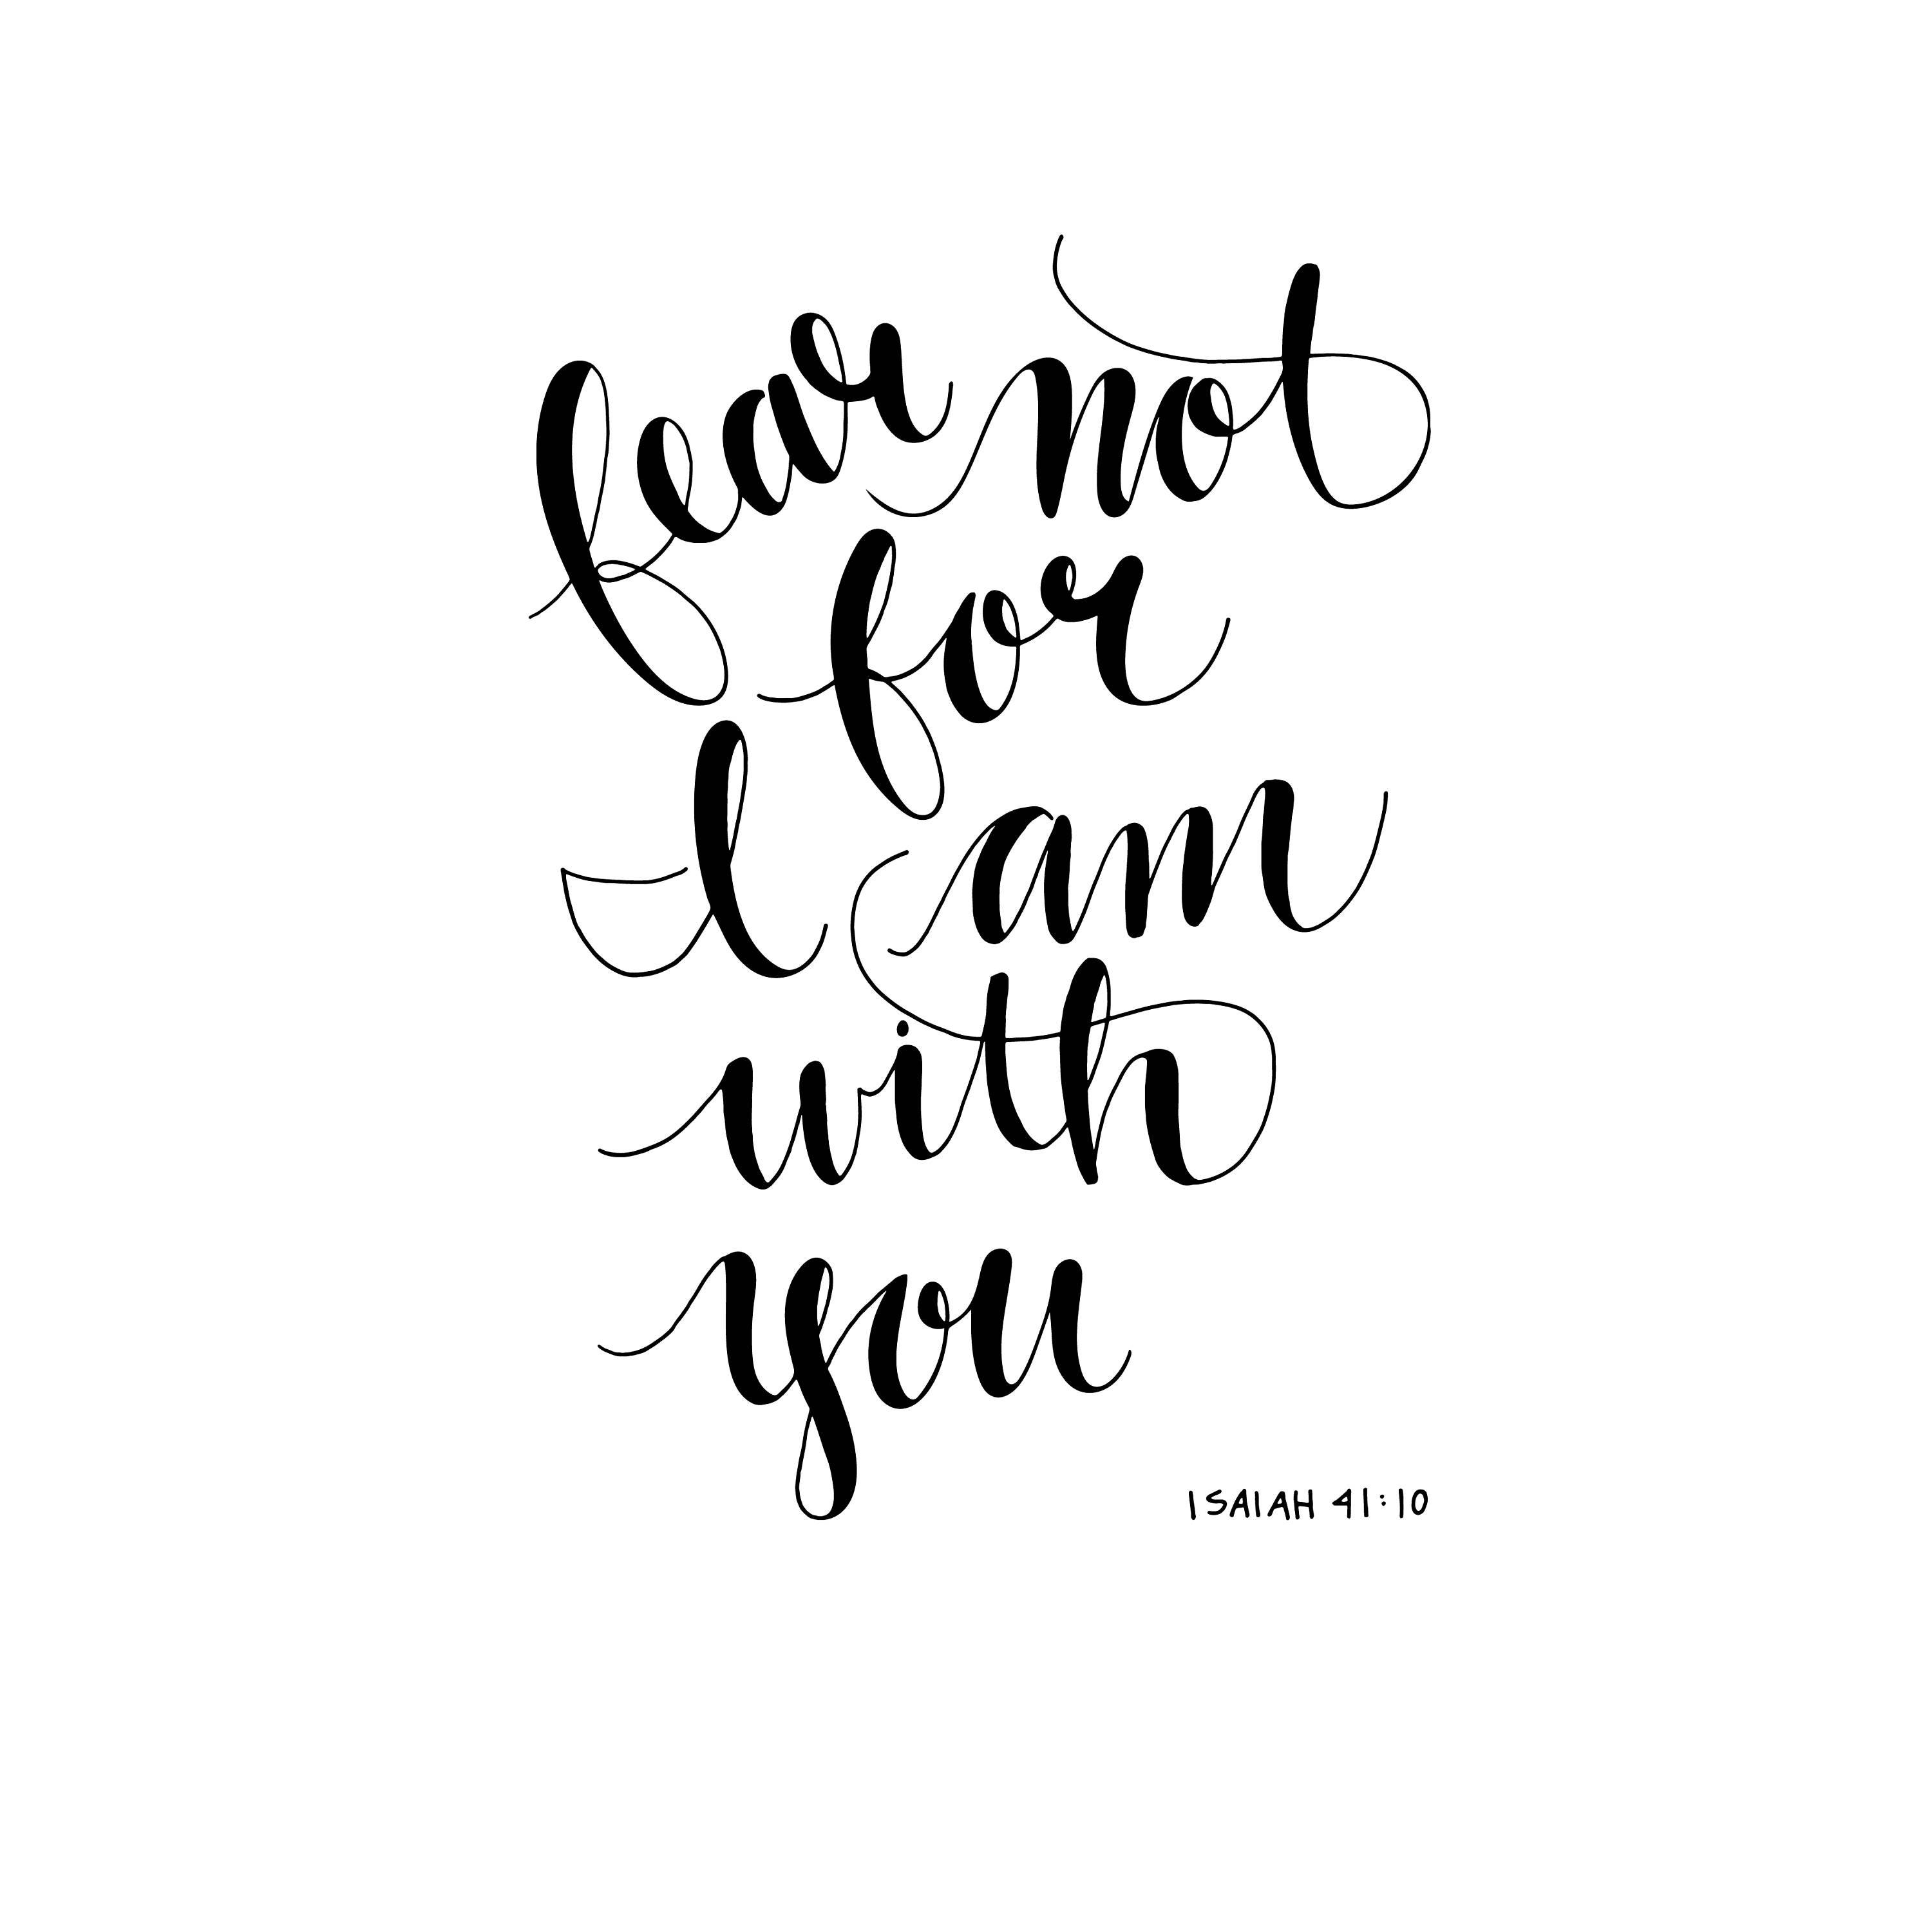 fear not for am with you